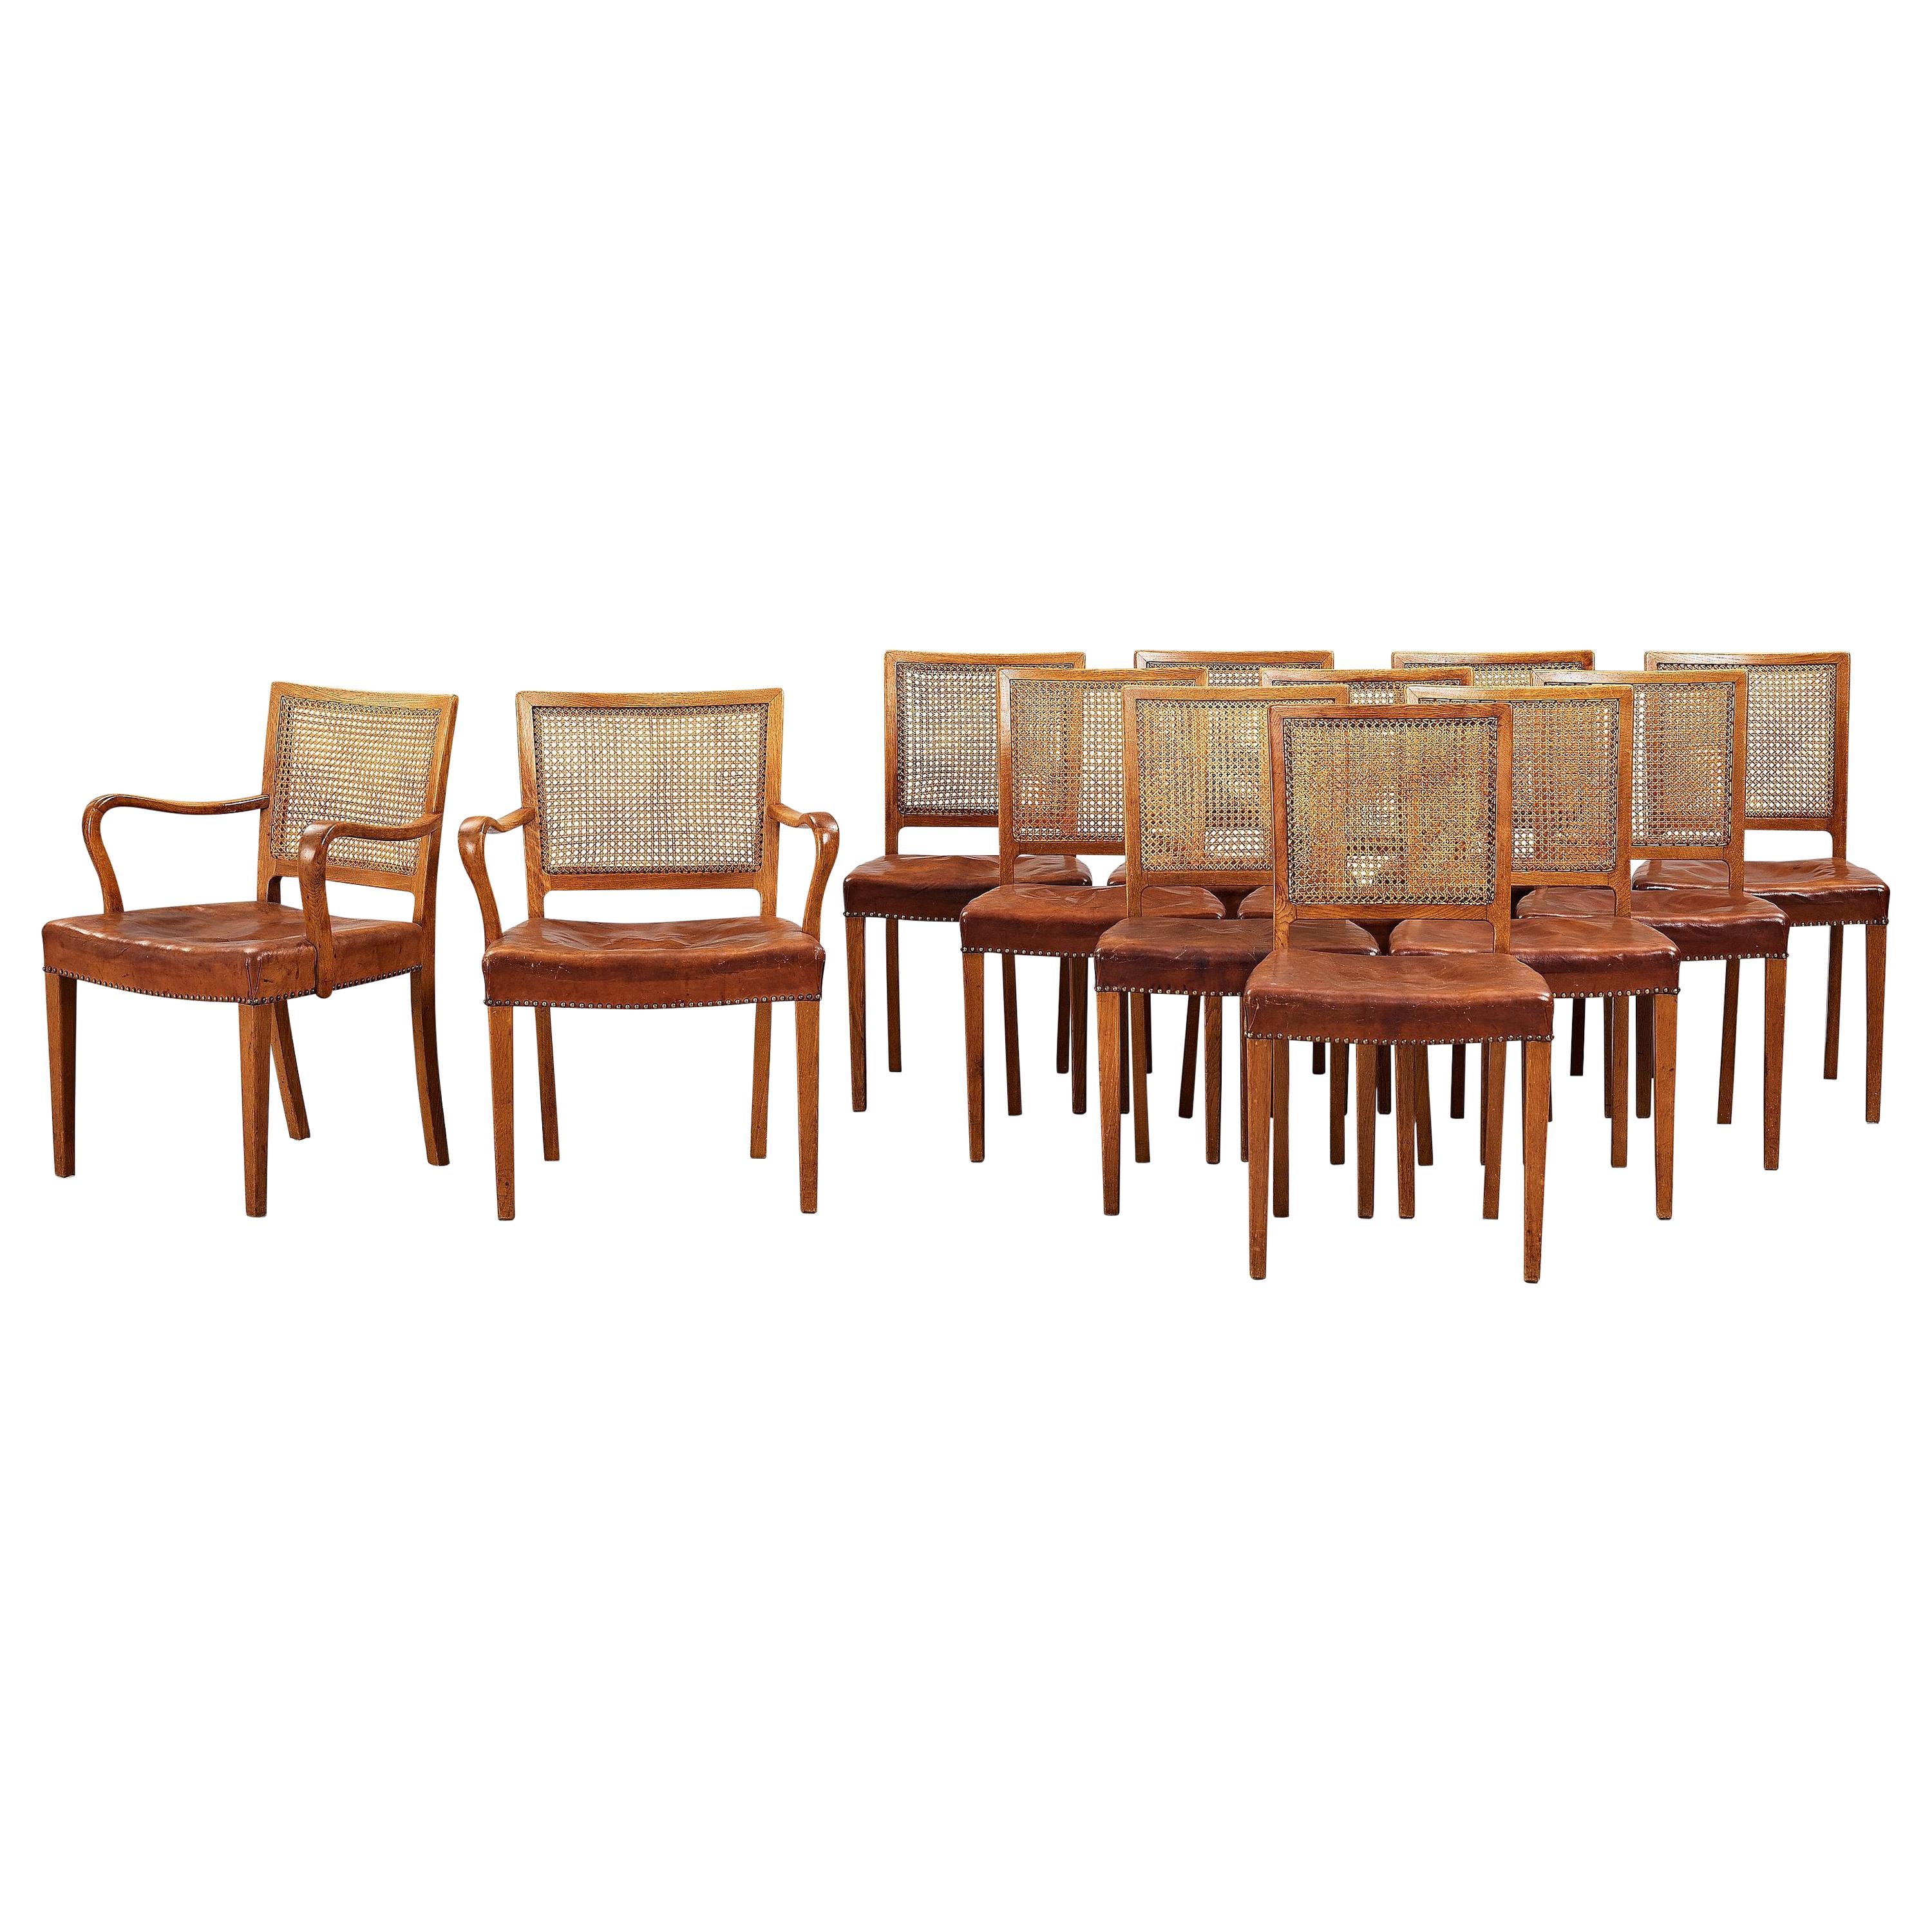 Erik Wørts Set of 12 Dining Chairs in Oak, Cane and Niger Leather, 1945